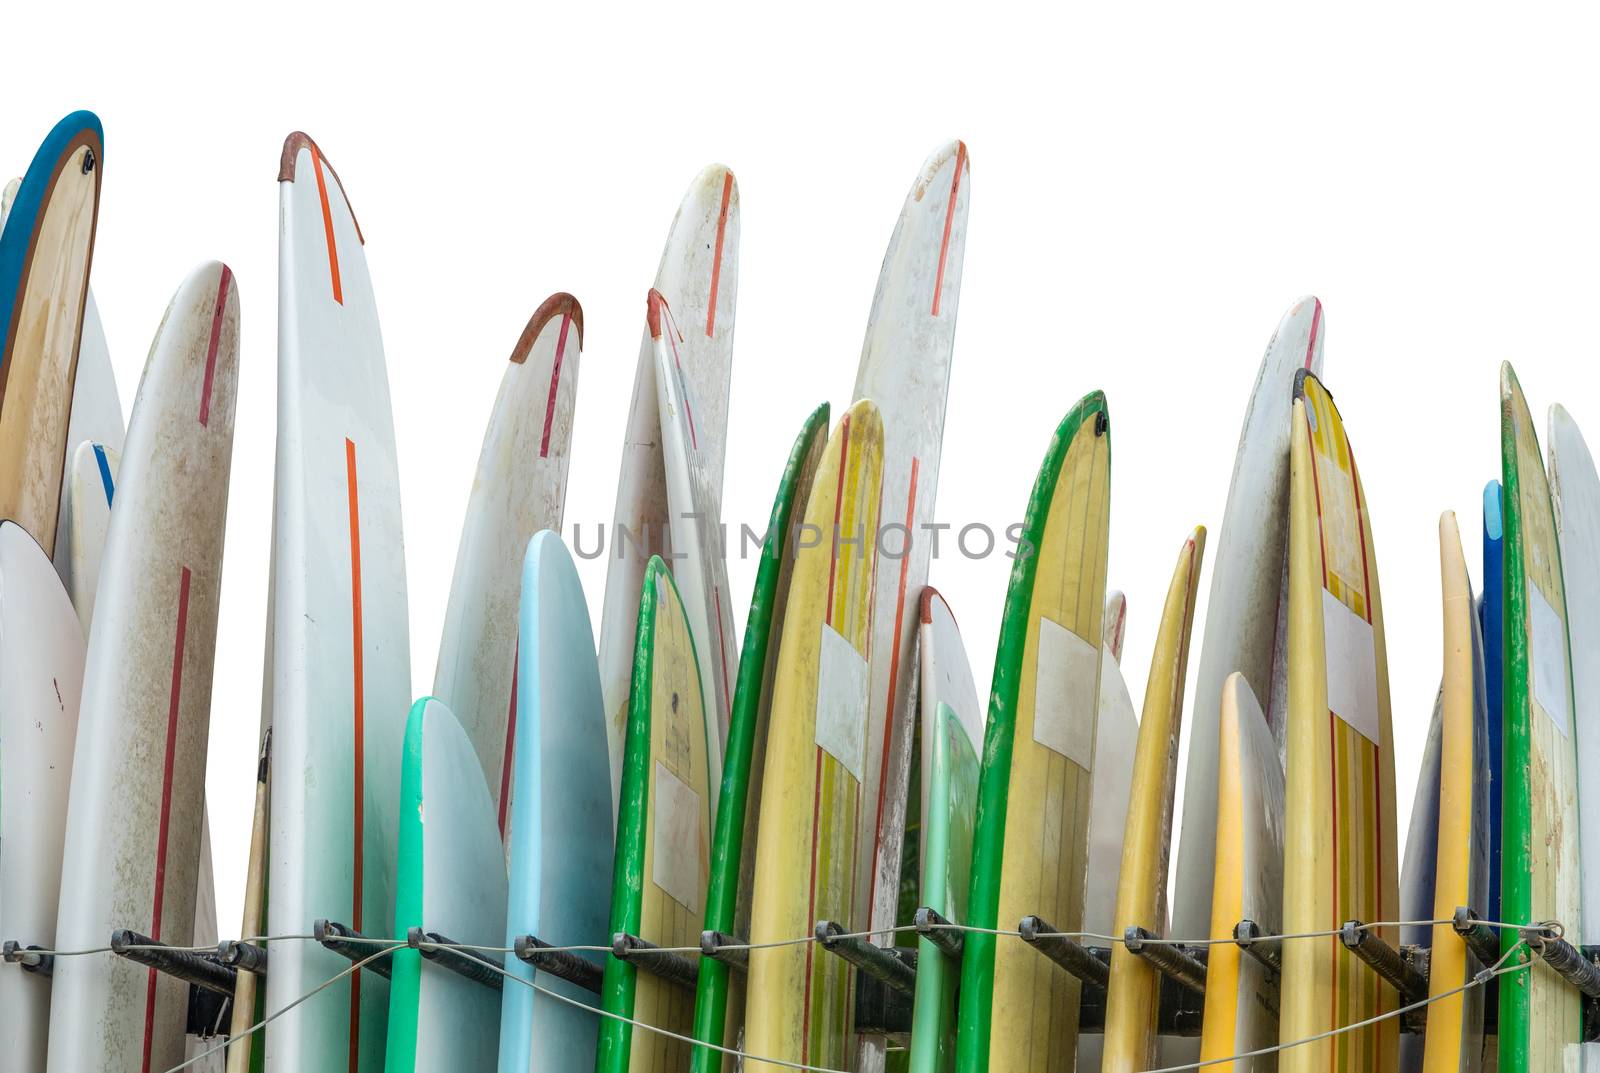 A Rack Of Rental Surfboards by mrdoomits